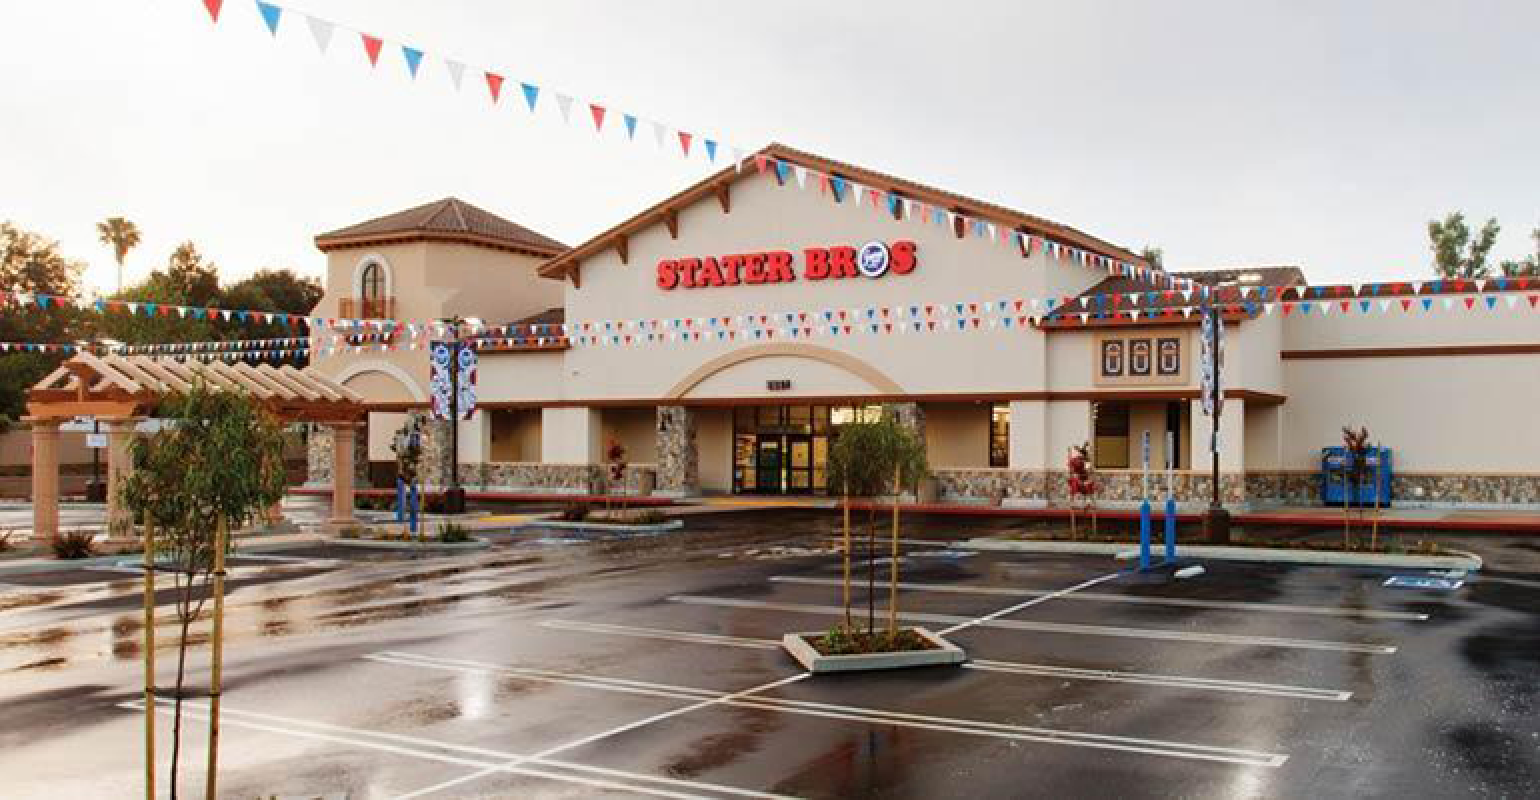 stater brothers